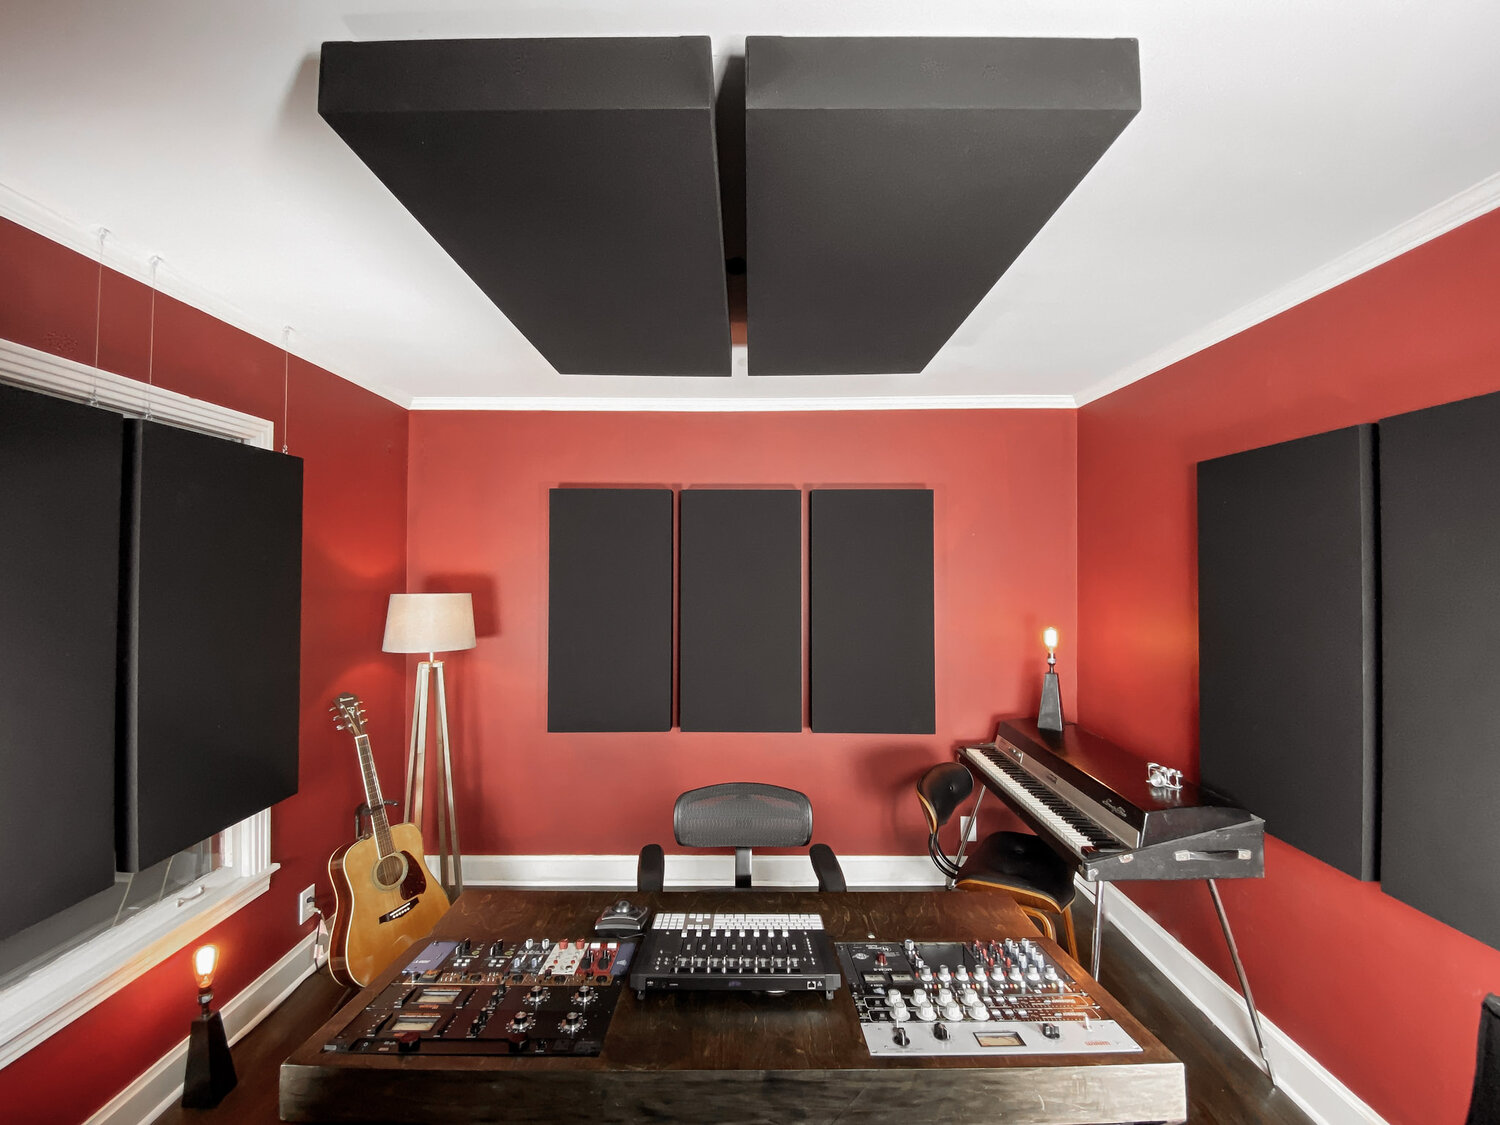 Sound Absorbing Panels for Home, Acoustic Treatment Panels for Home Studio